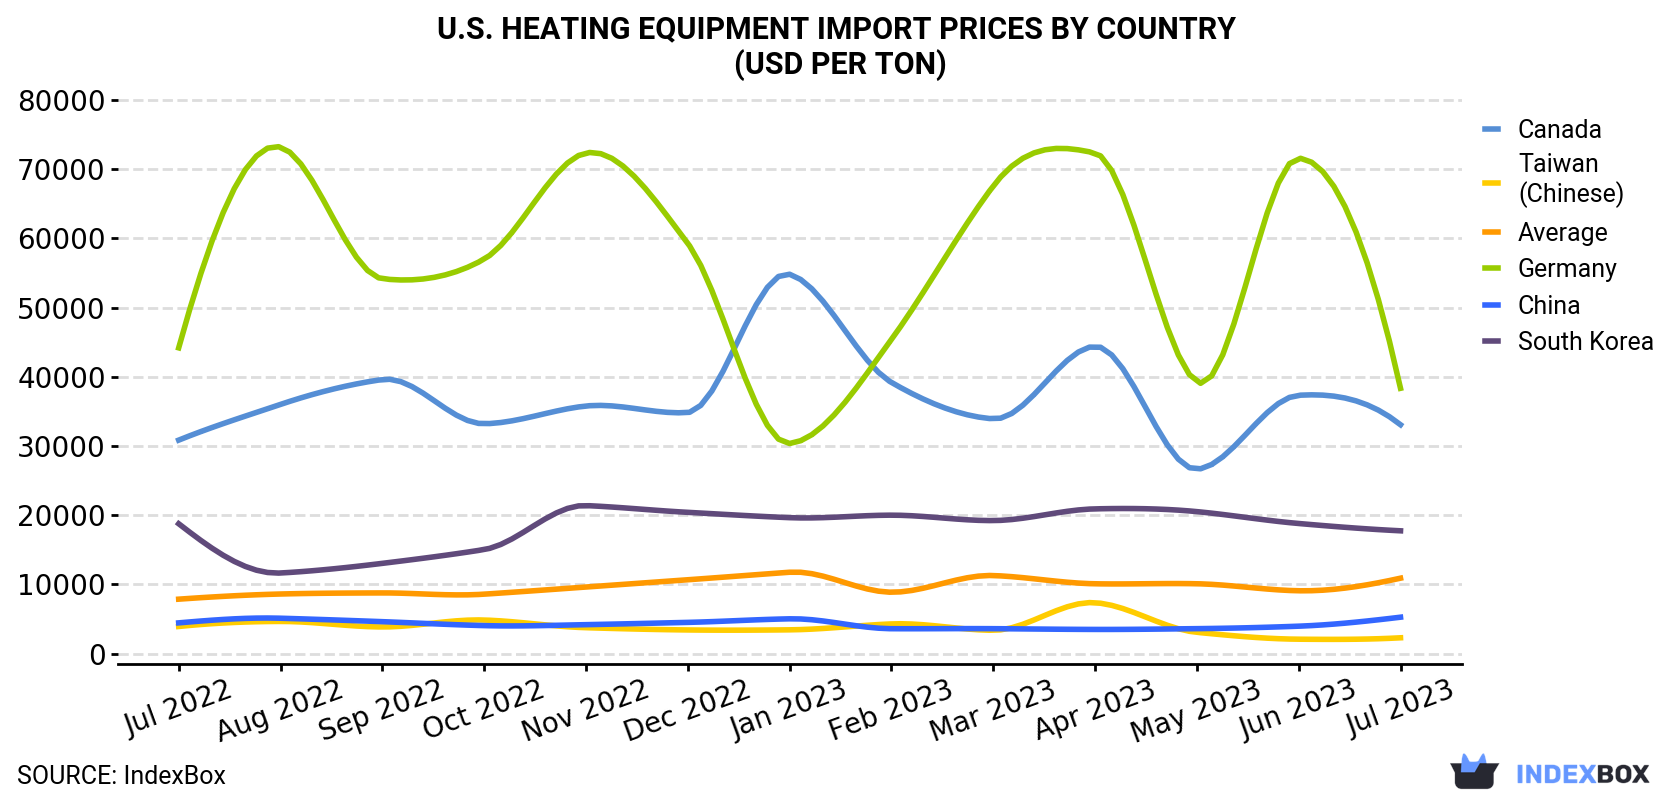 U.S. Heating Equipment Import Prices By Country (USD Per Ton)